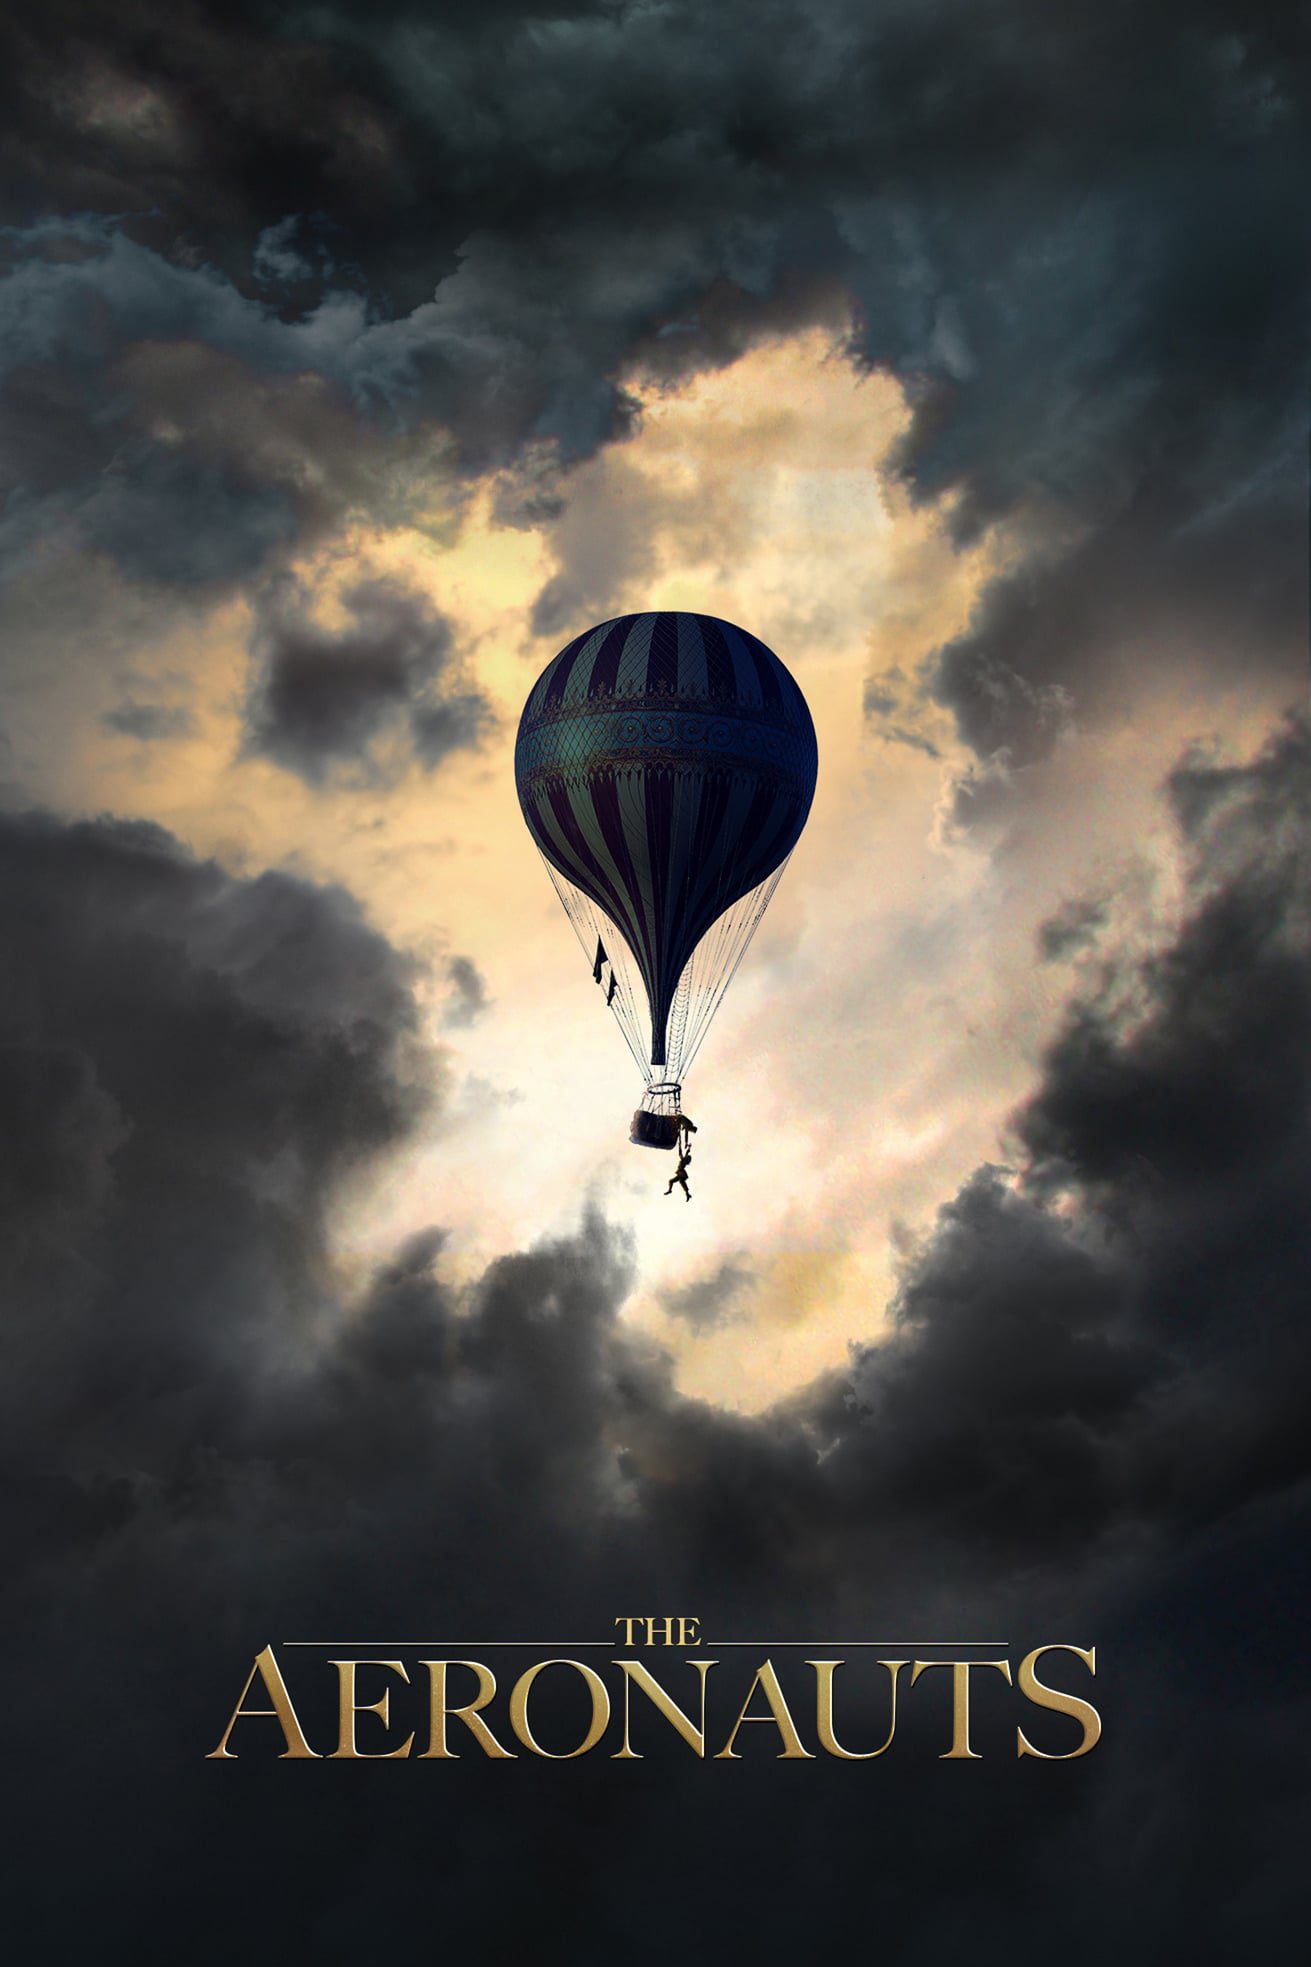 Poster for the movie "The Aeronauts"